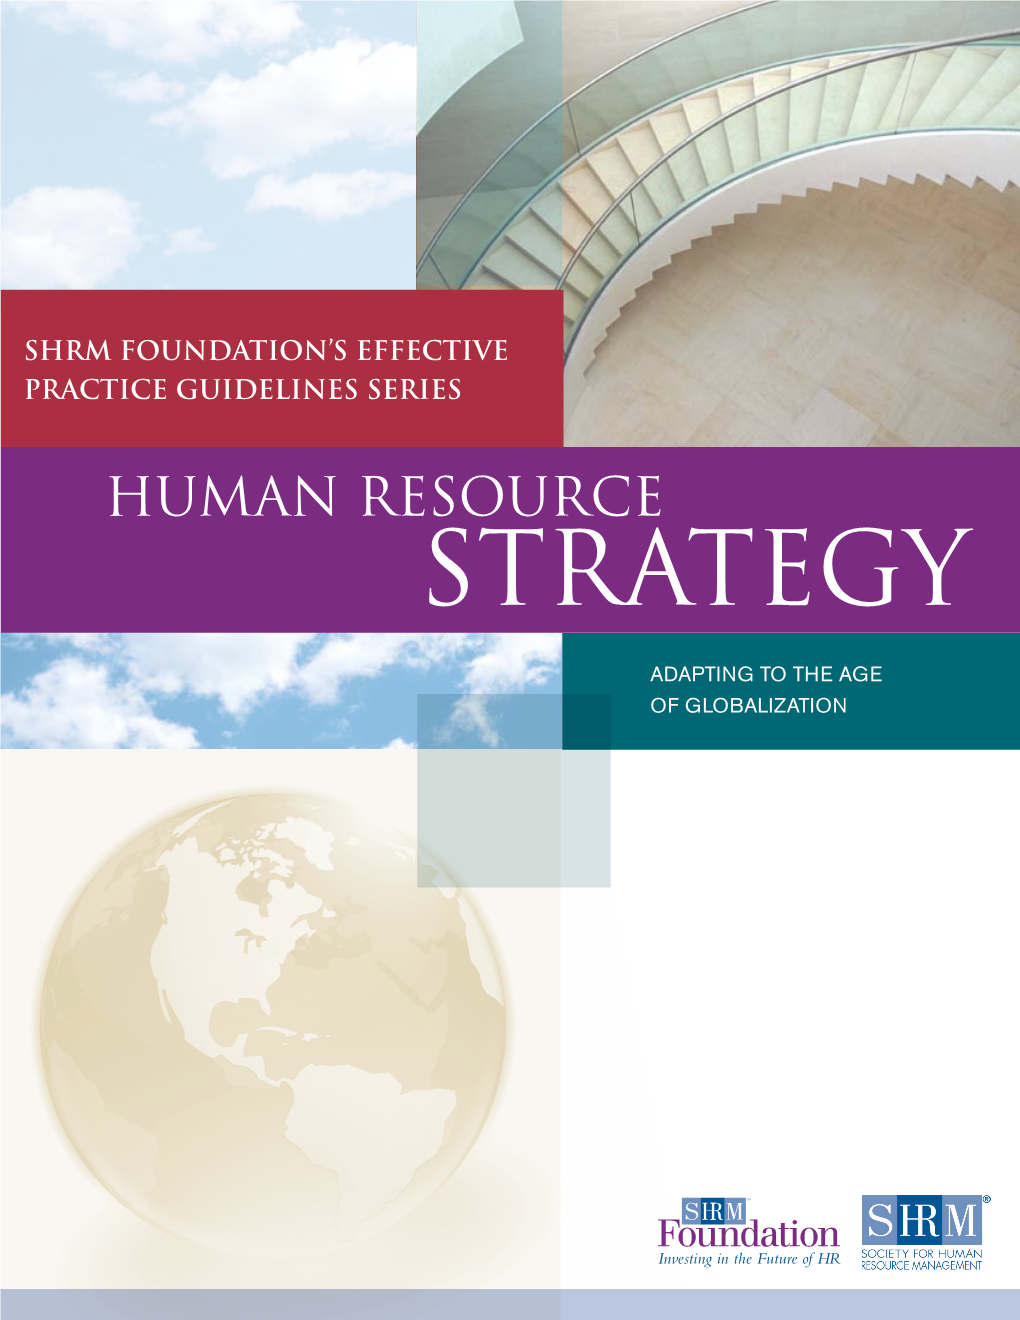 Human Resource Strategy: Adapting to the Age of Globalization